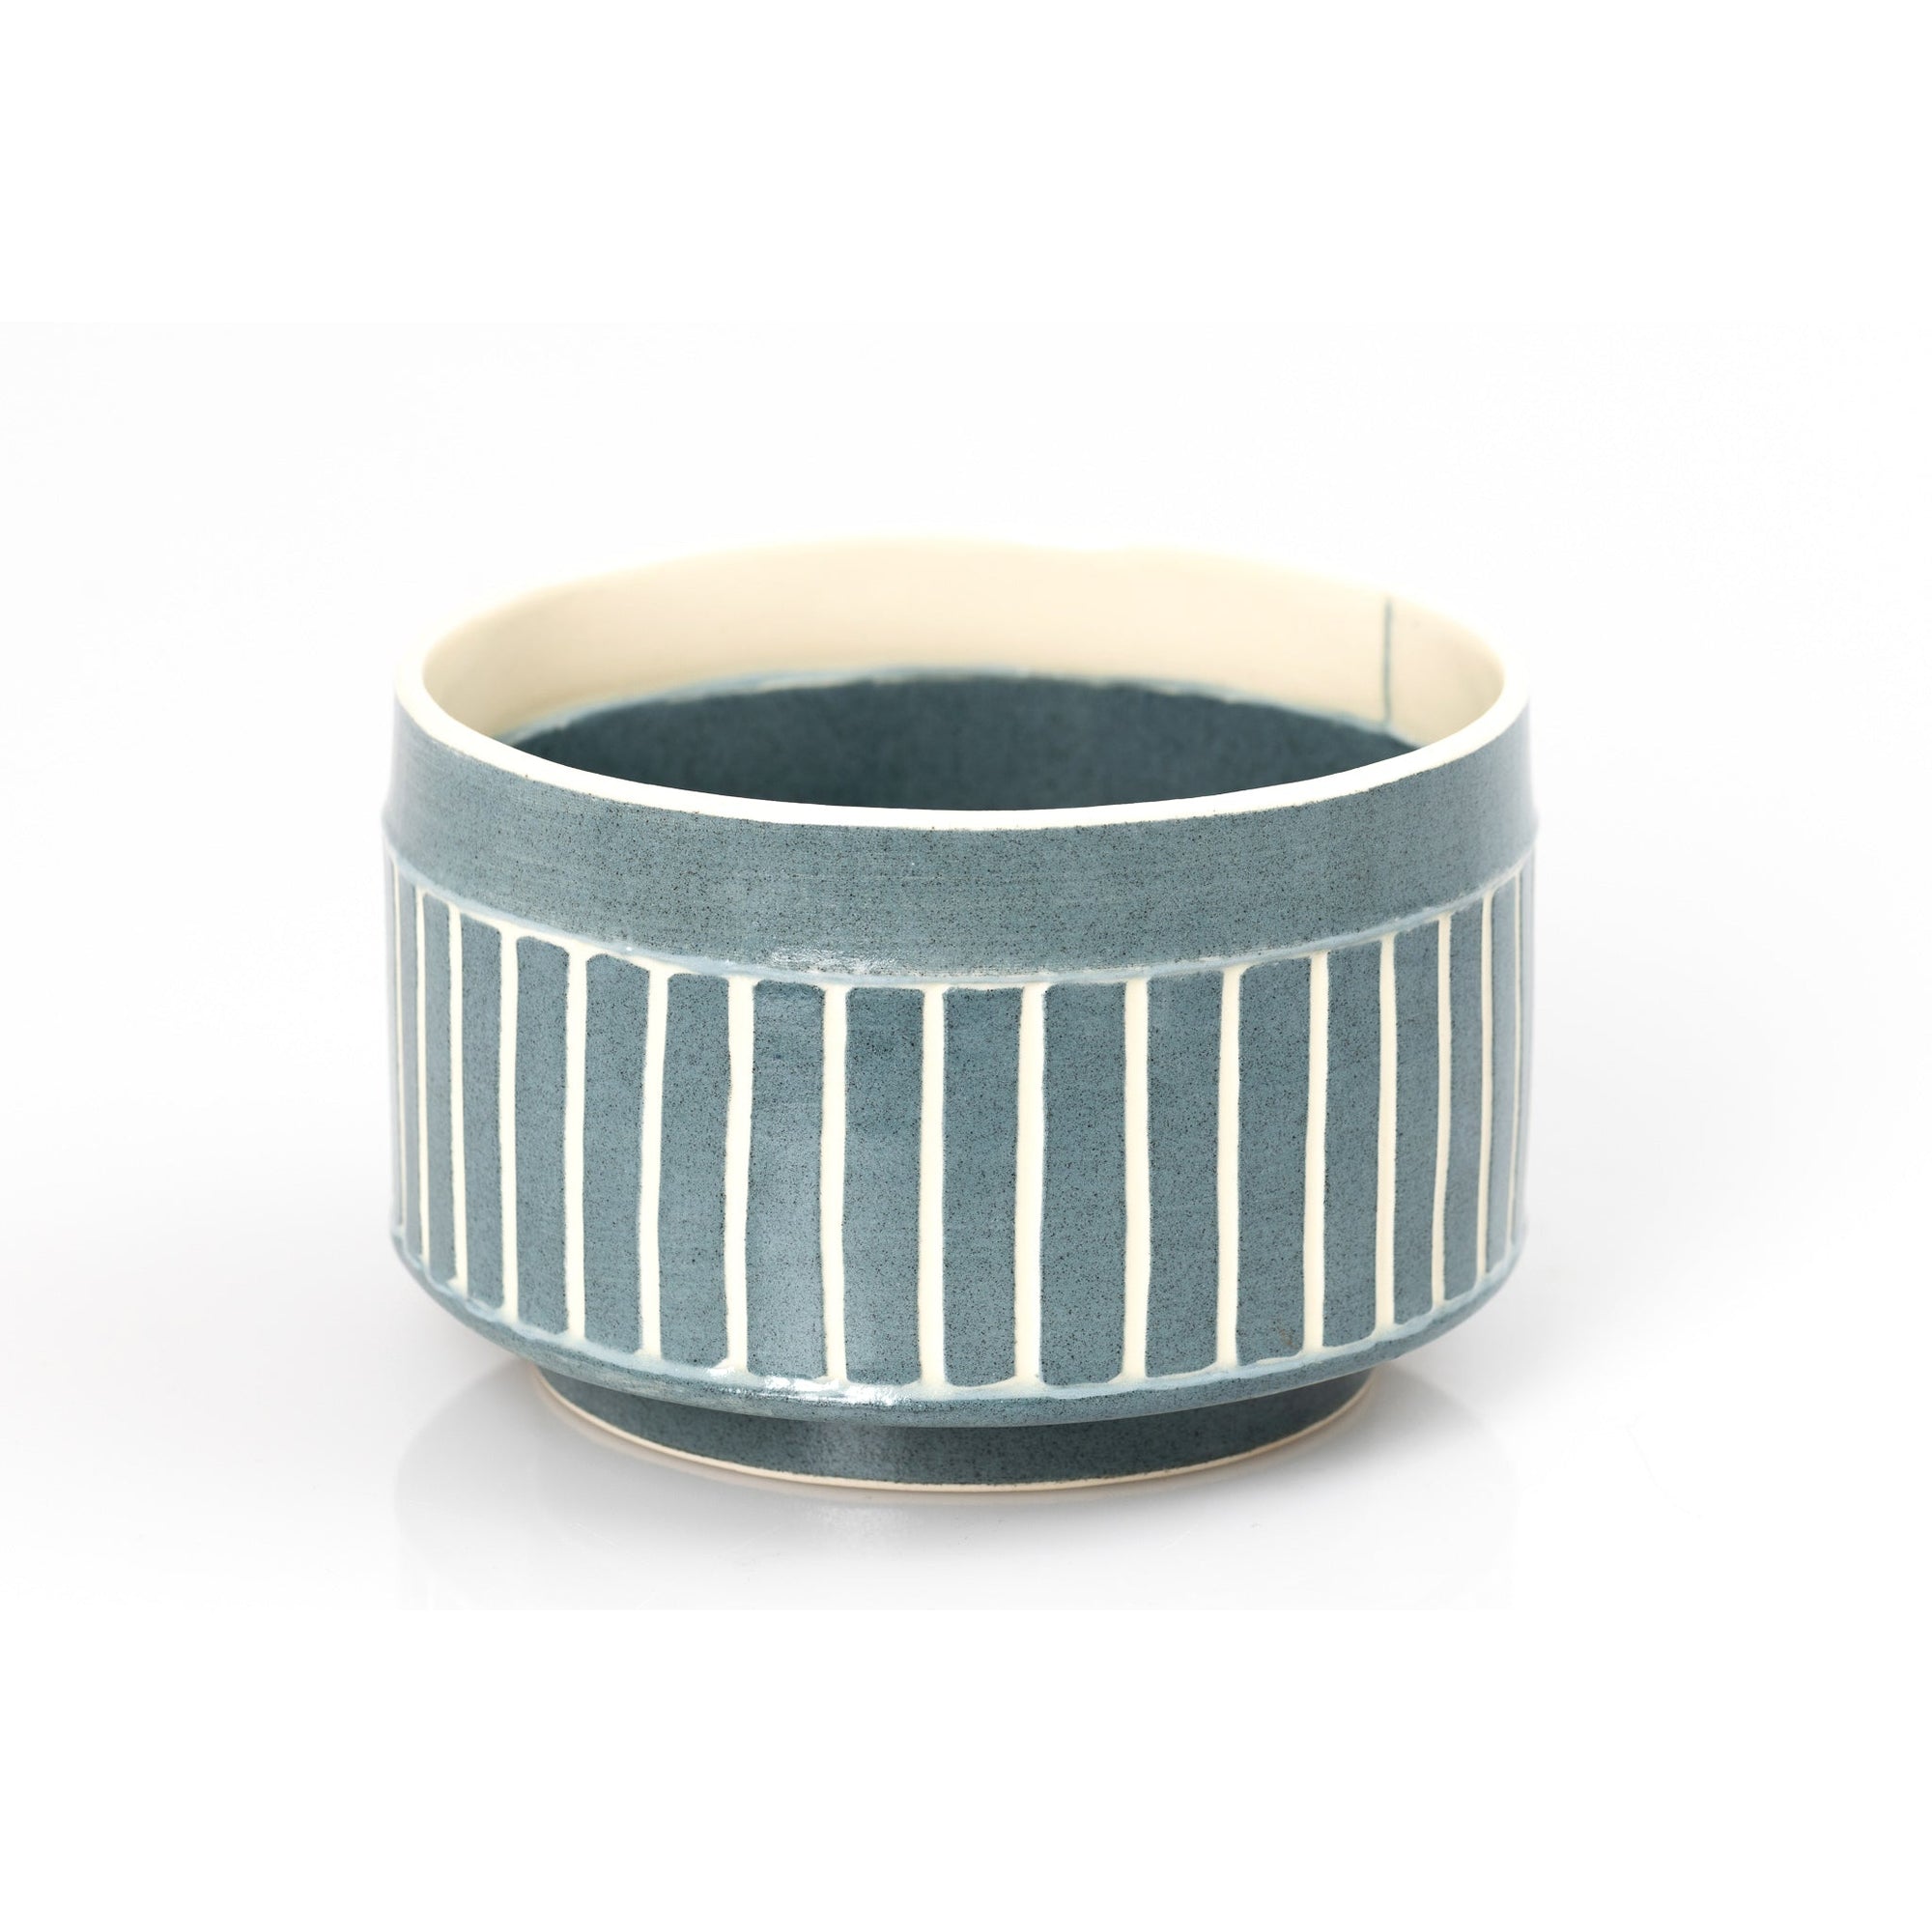 Sh.V2 Short Bowl, handbuilt ceramic created by Emily-Kriste Wilcox, available from Padstow Gallery, Cornwall